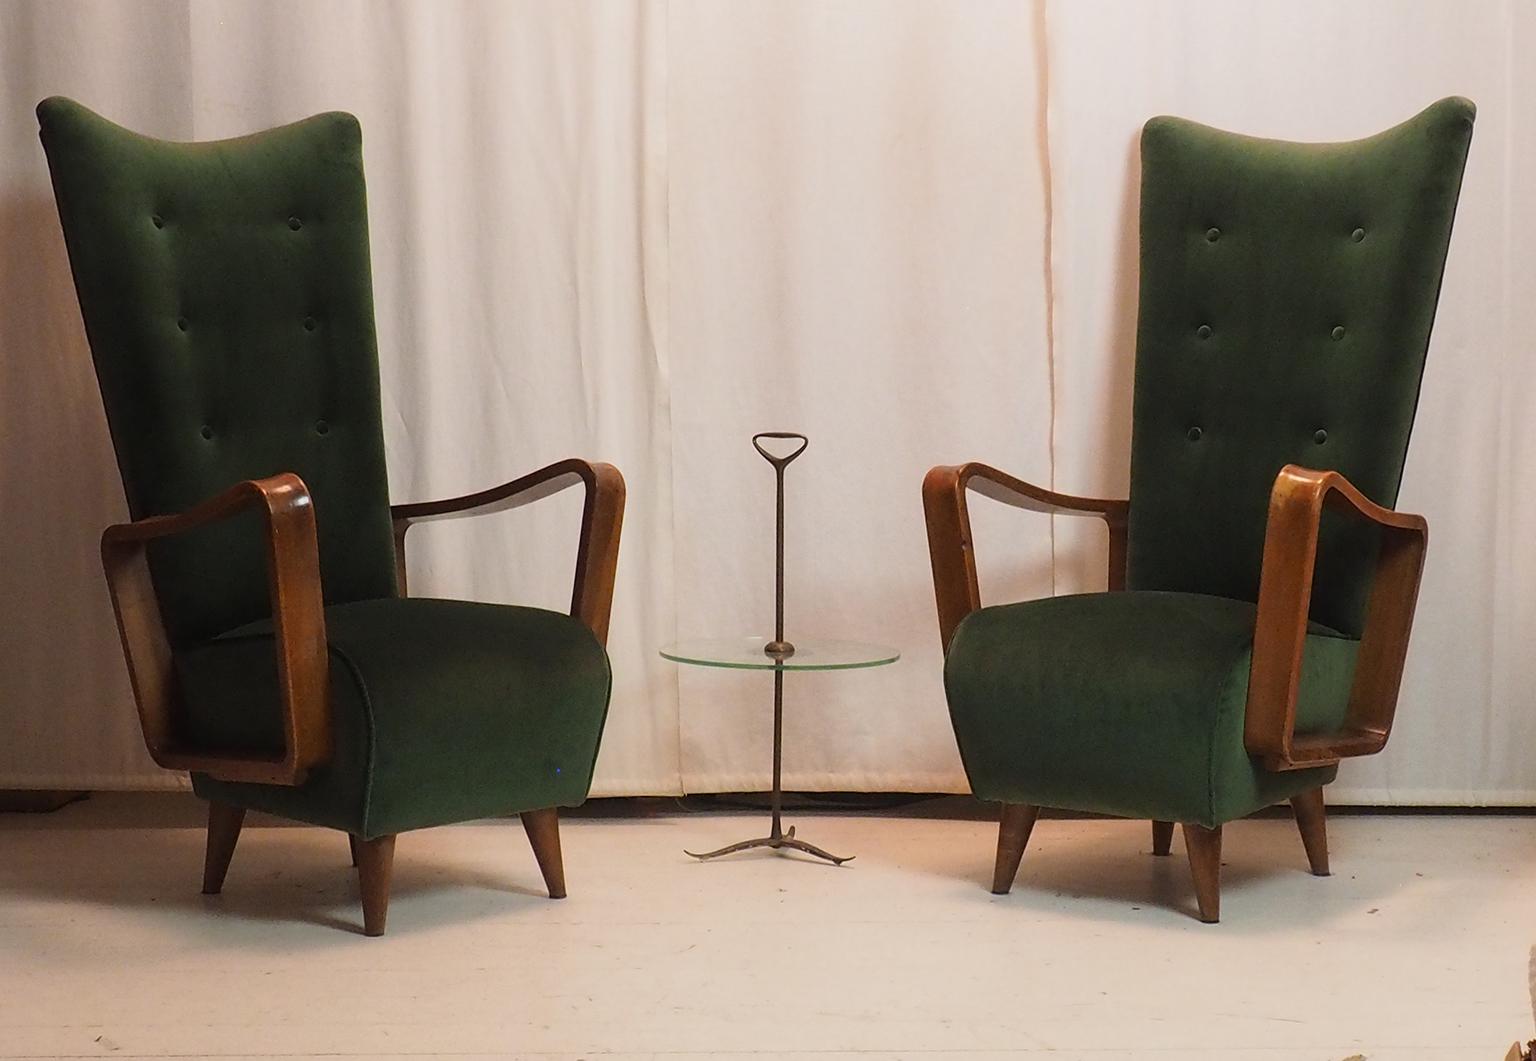 Midcentury High Back Italian Green Armchairs by Pietro Lingeri, Italy, 1950s For Sale 2